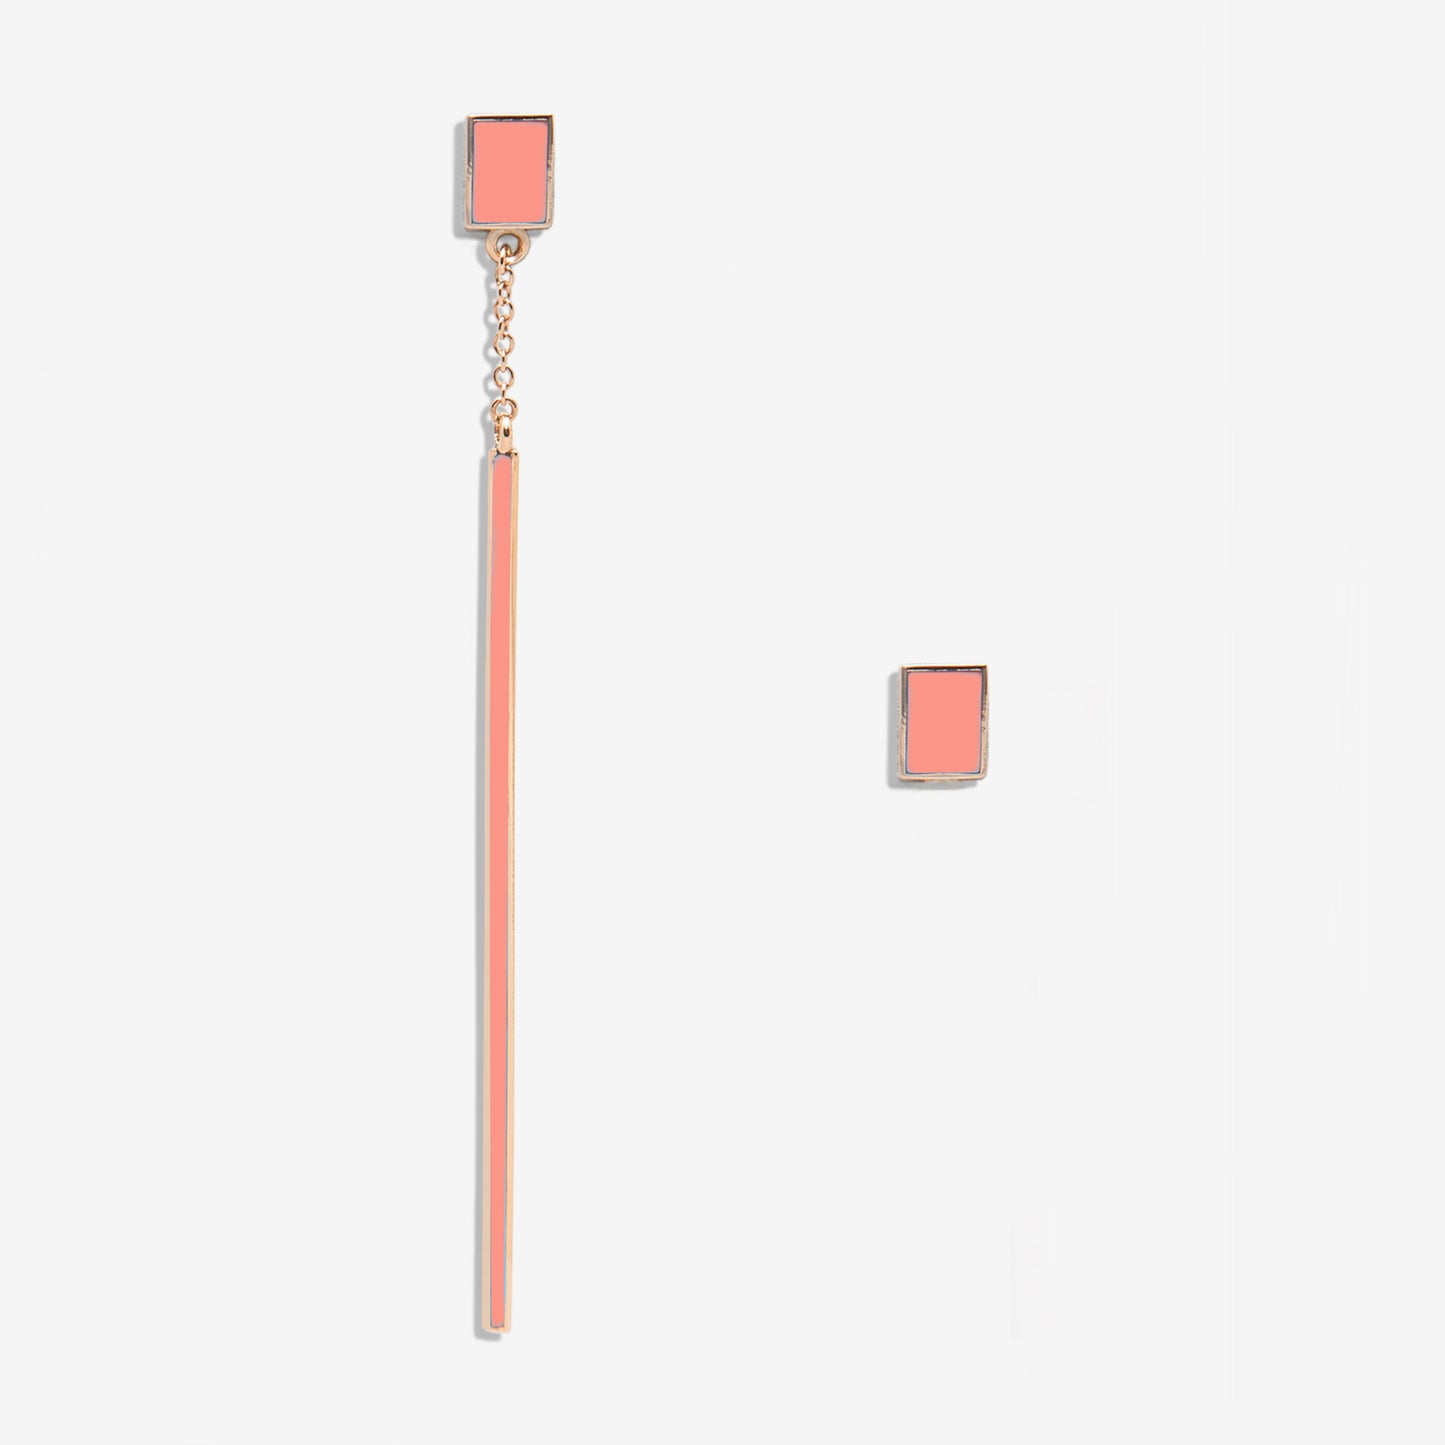 Floating salmon pink drop earring and rectangle